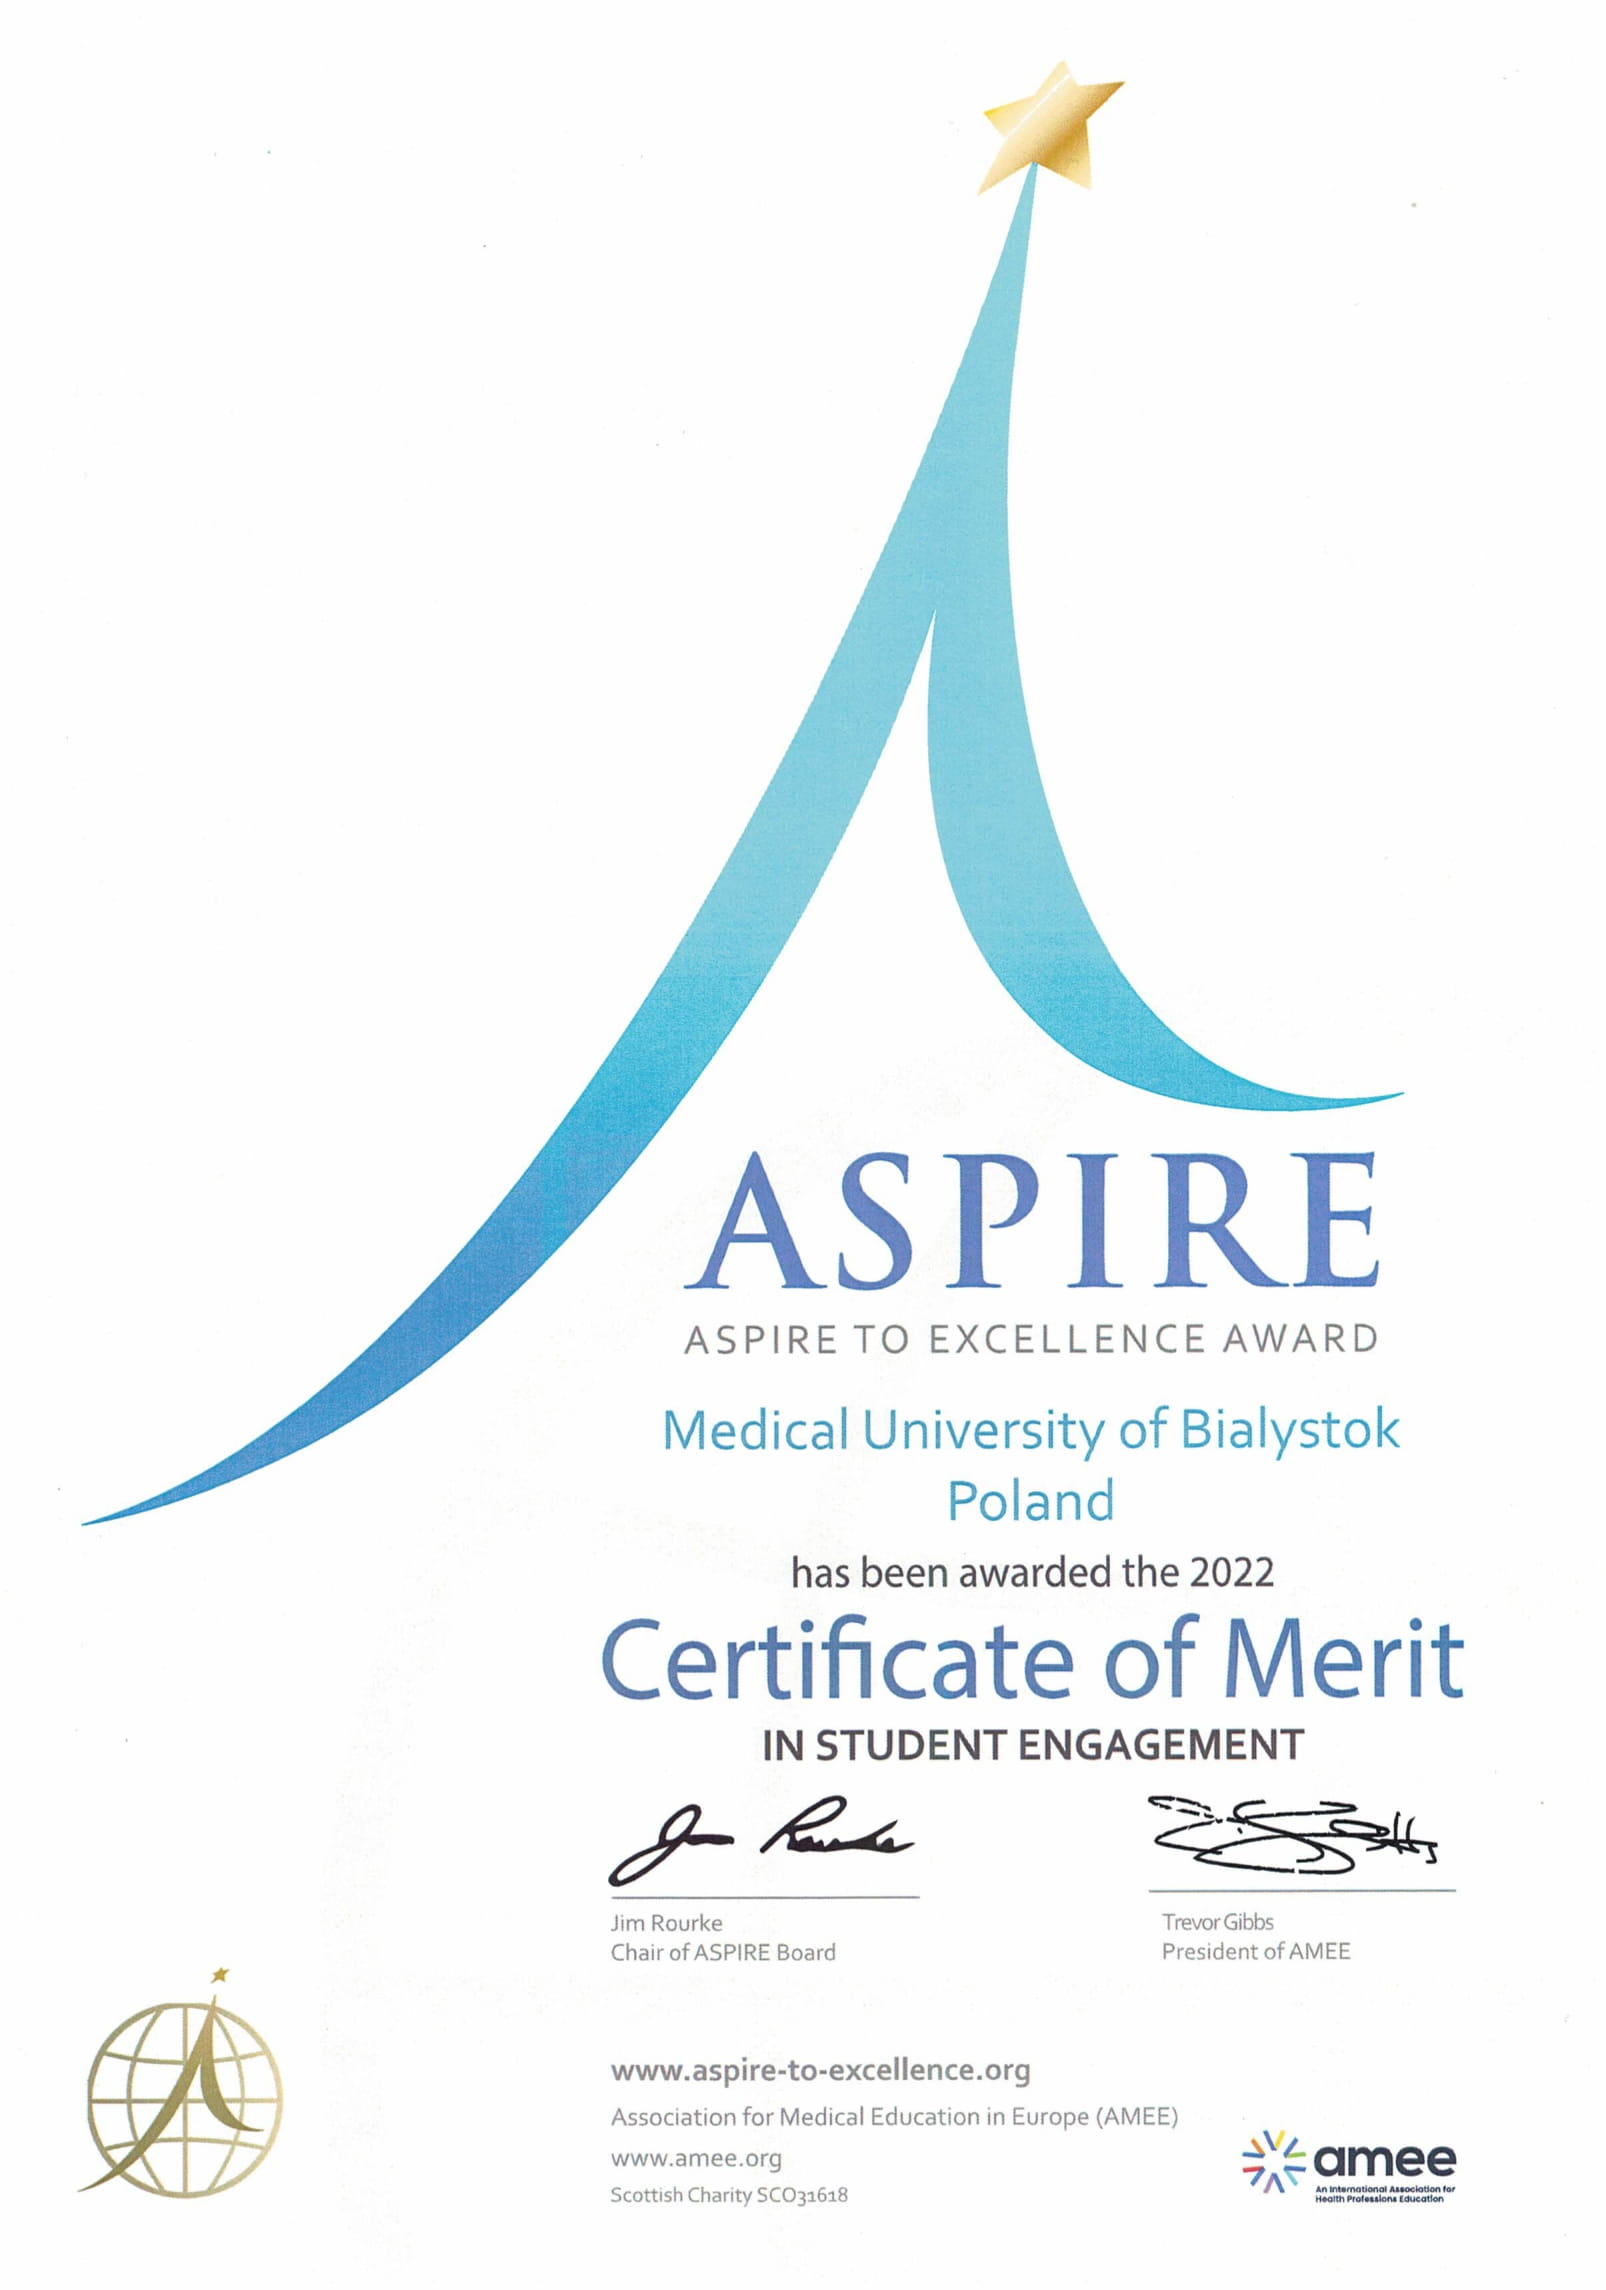 ASPIRE to Excellence Award Medical University of Bialystok has been awarded the 2022 Certificate of Merit in Student Engagement